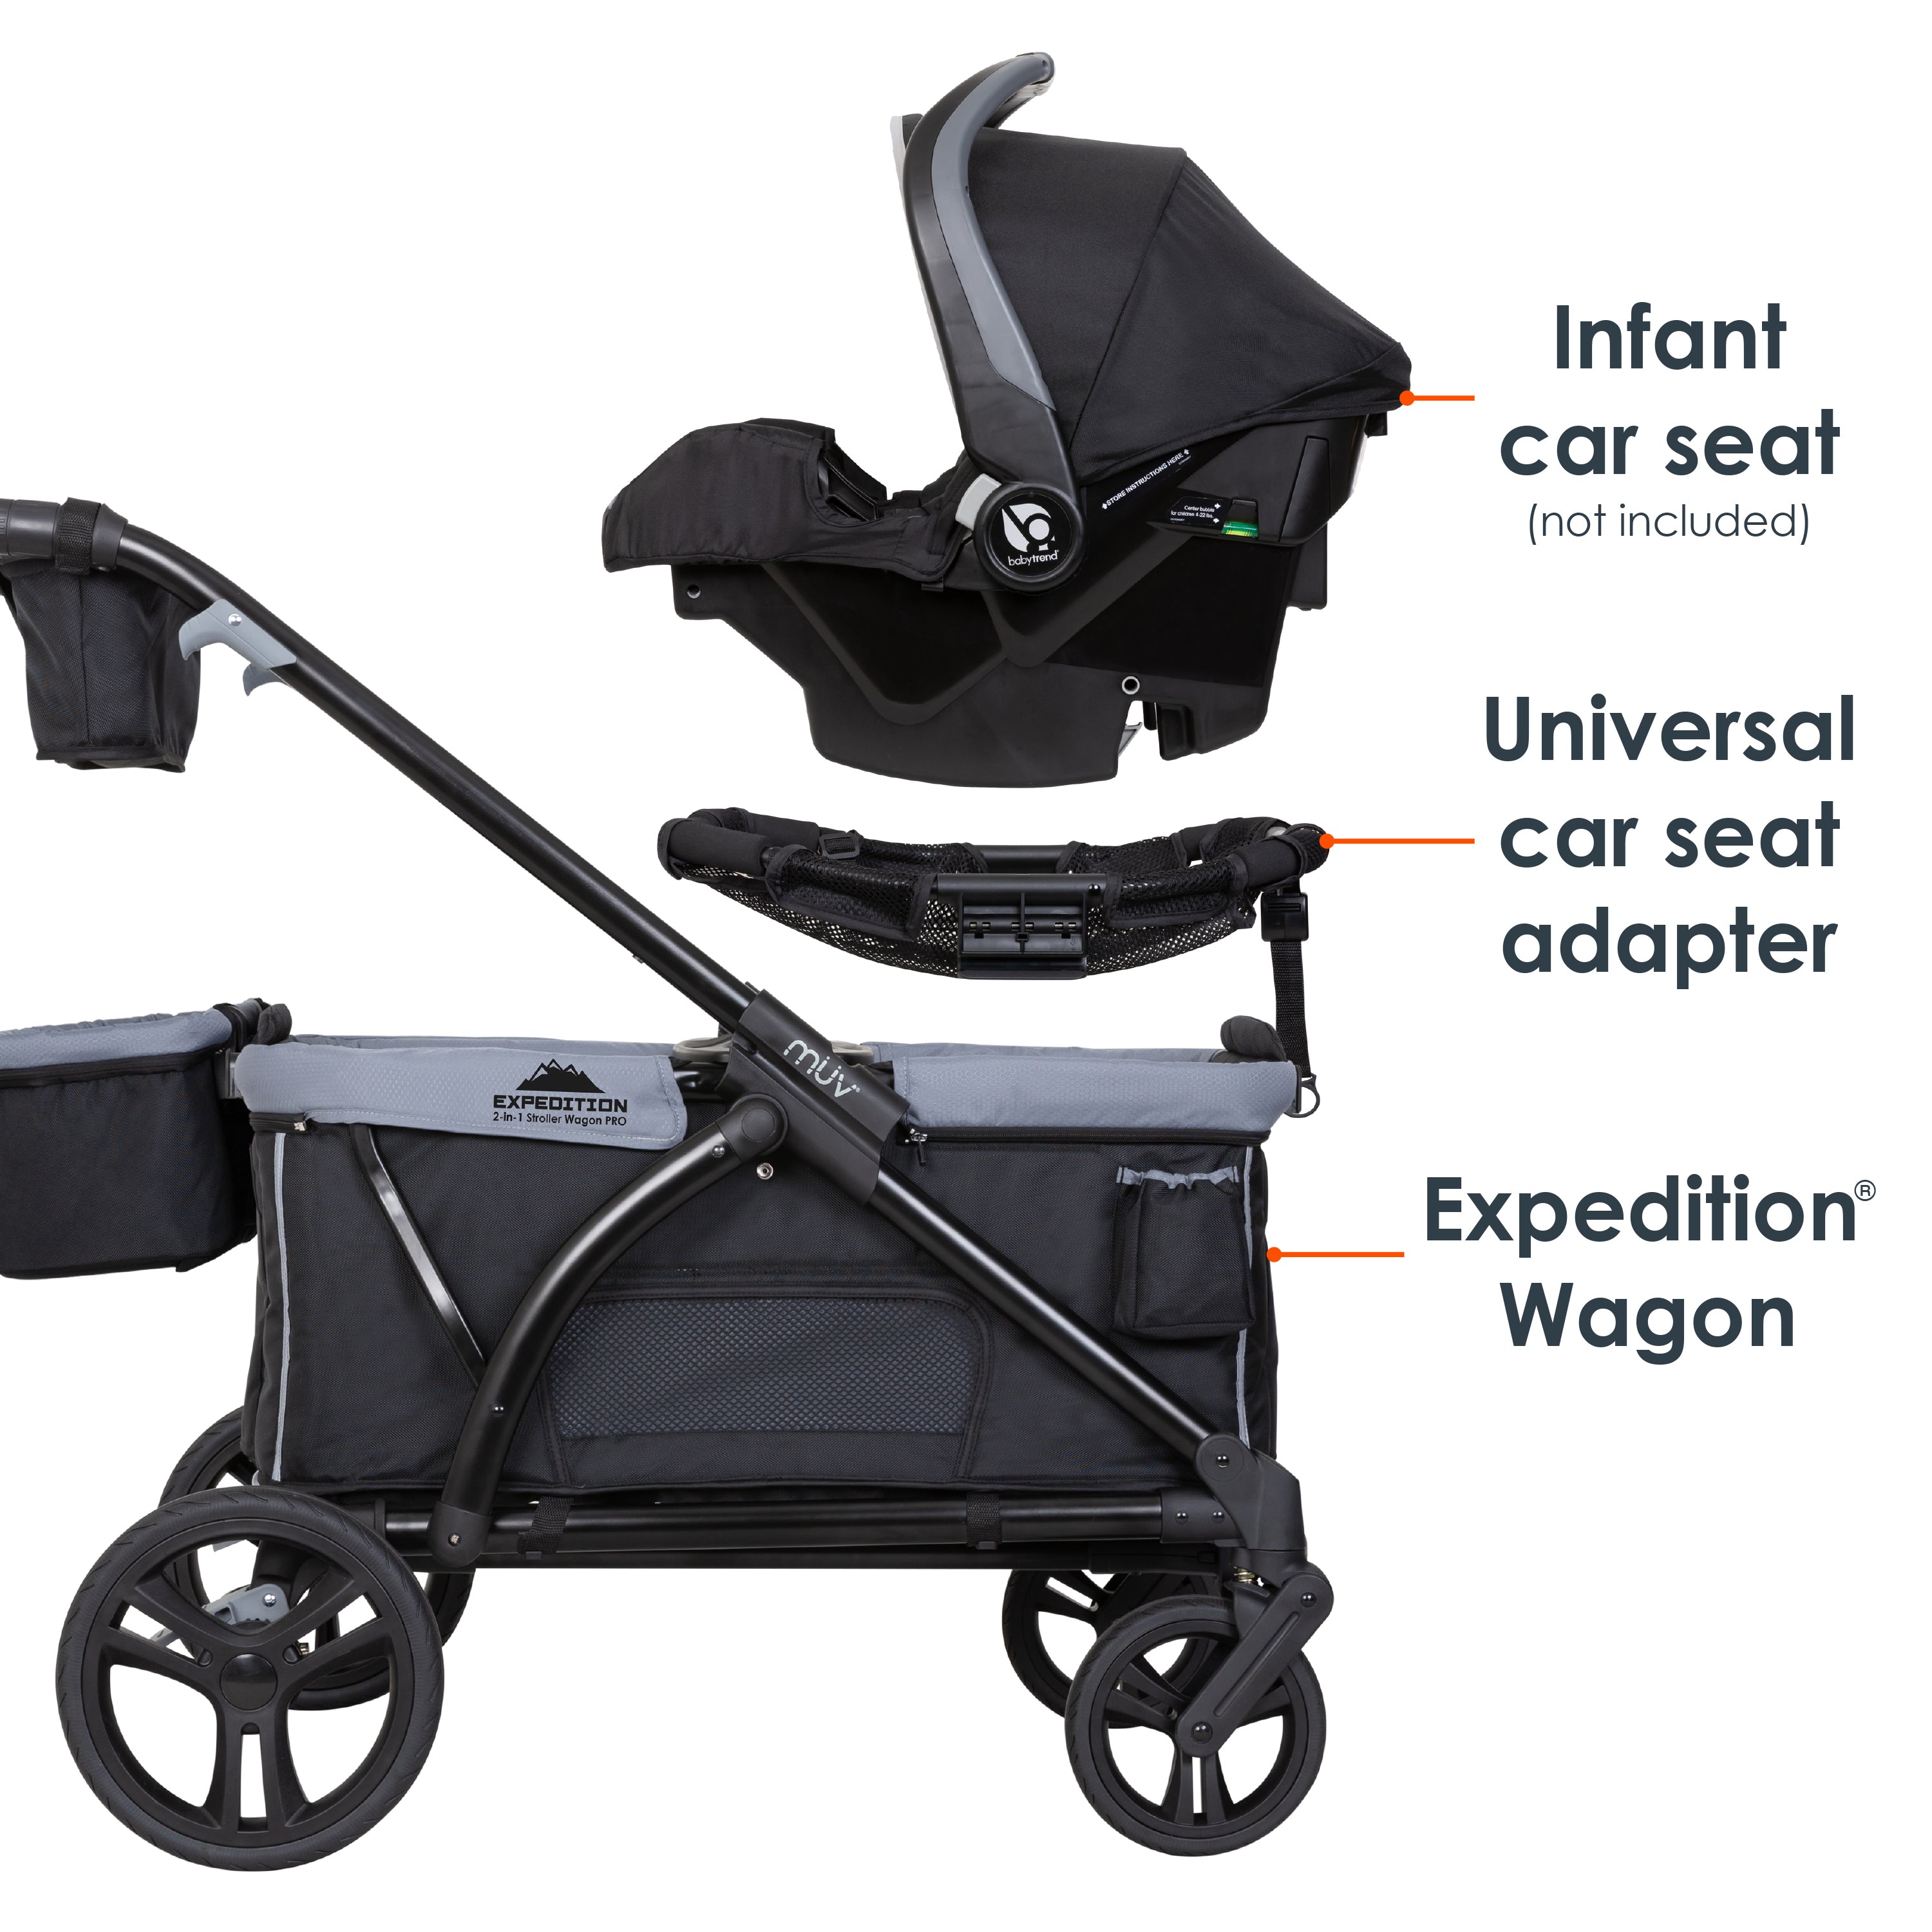 Trend Wagon Baby Equinox Expedition® 2-in-1 Stroller MUV® PRO |